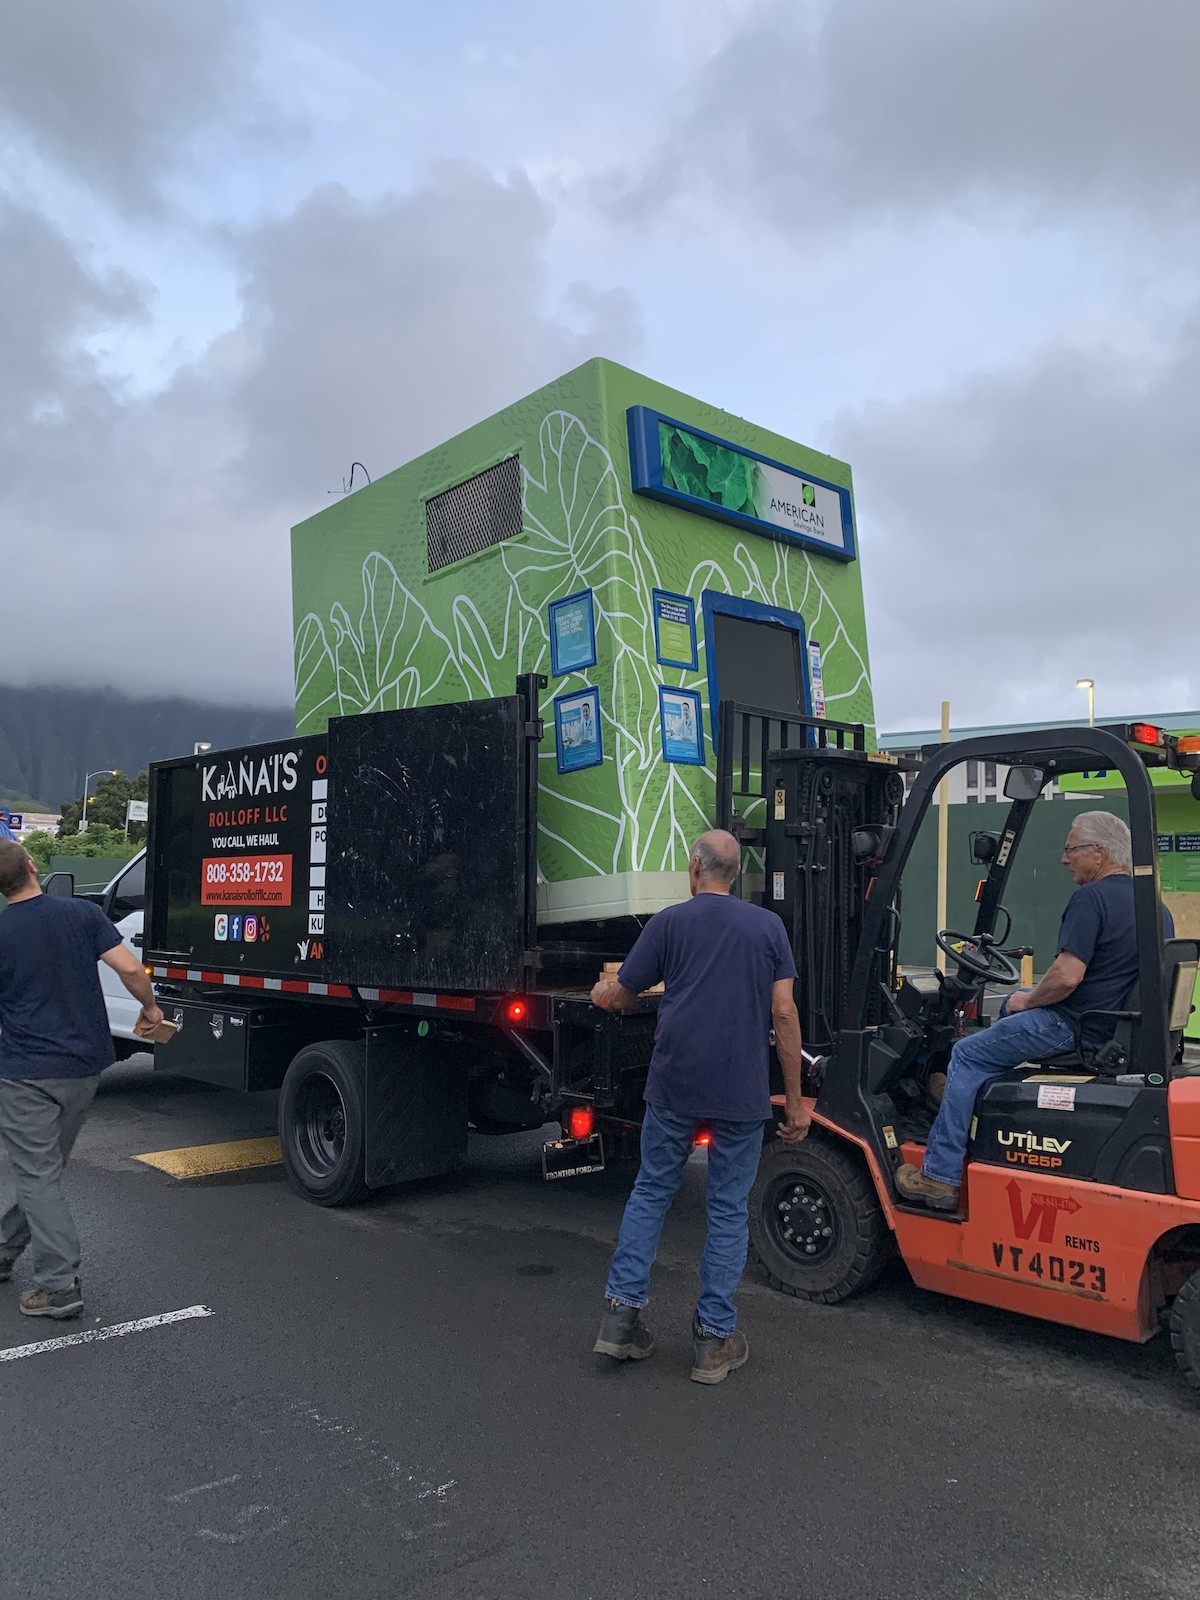 Kana'i's Junk Removal team hauling a green full-sized kiosk in a local parking lot.